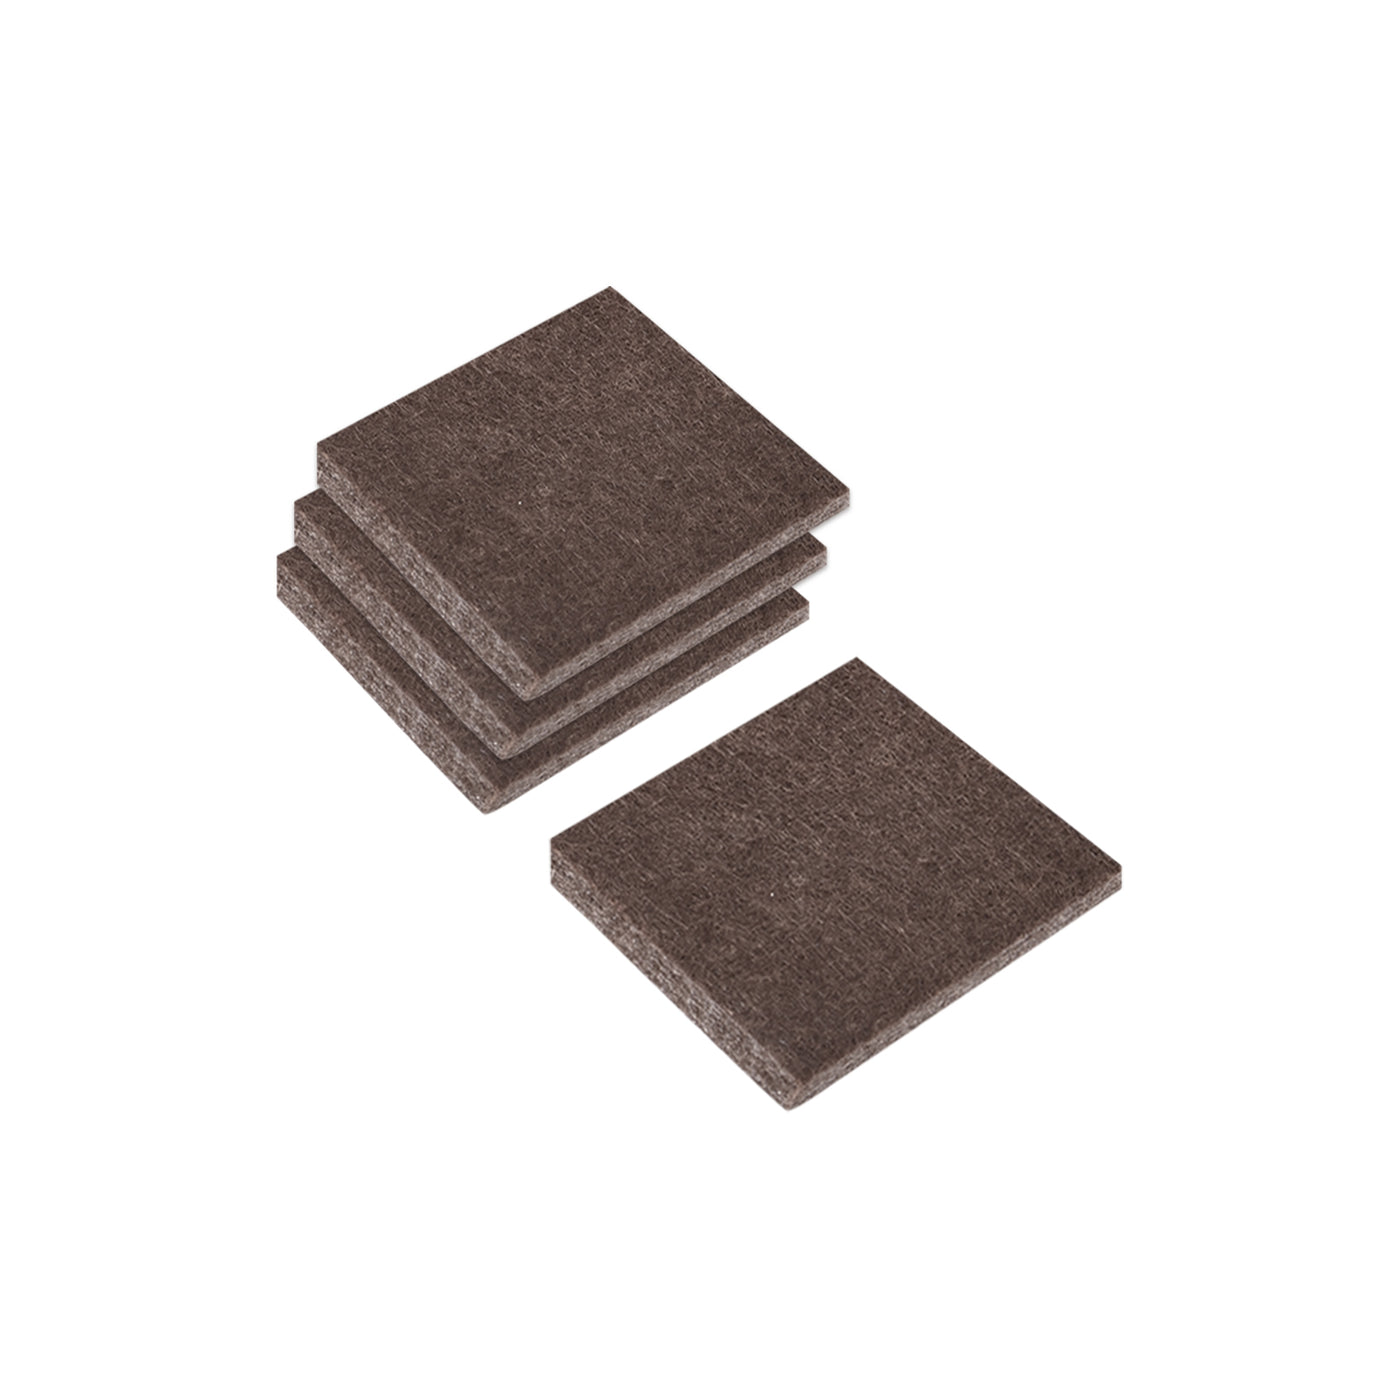 uxcell Uxcell Felt Furniture Pads, 27mm x 27mm Self Adhesive Square Floor Protectors for Furniture Legs Hardwood Floor, Brown 40Pcs